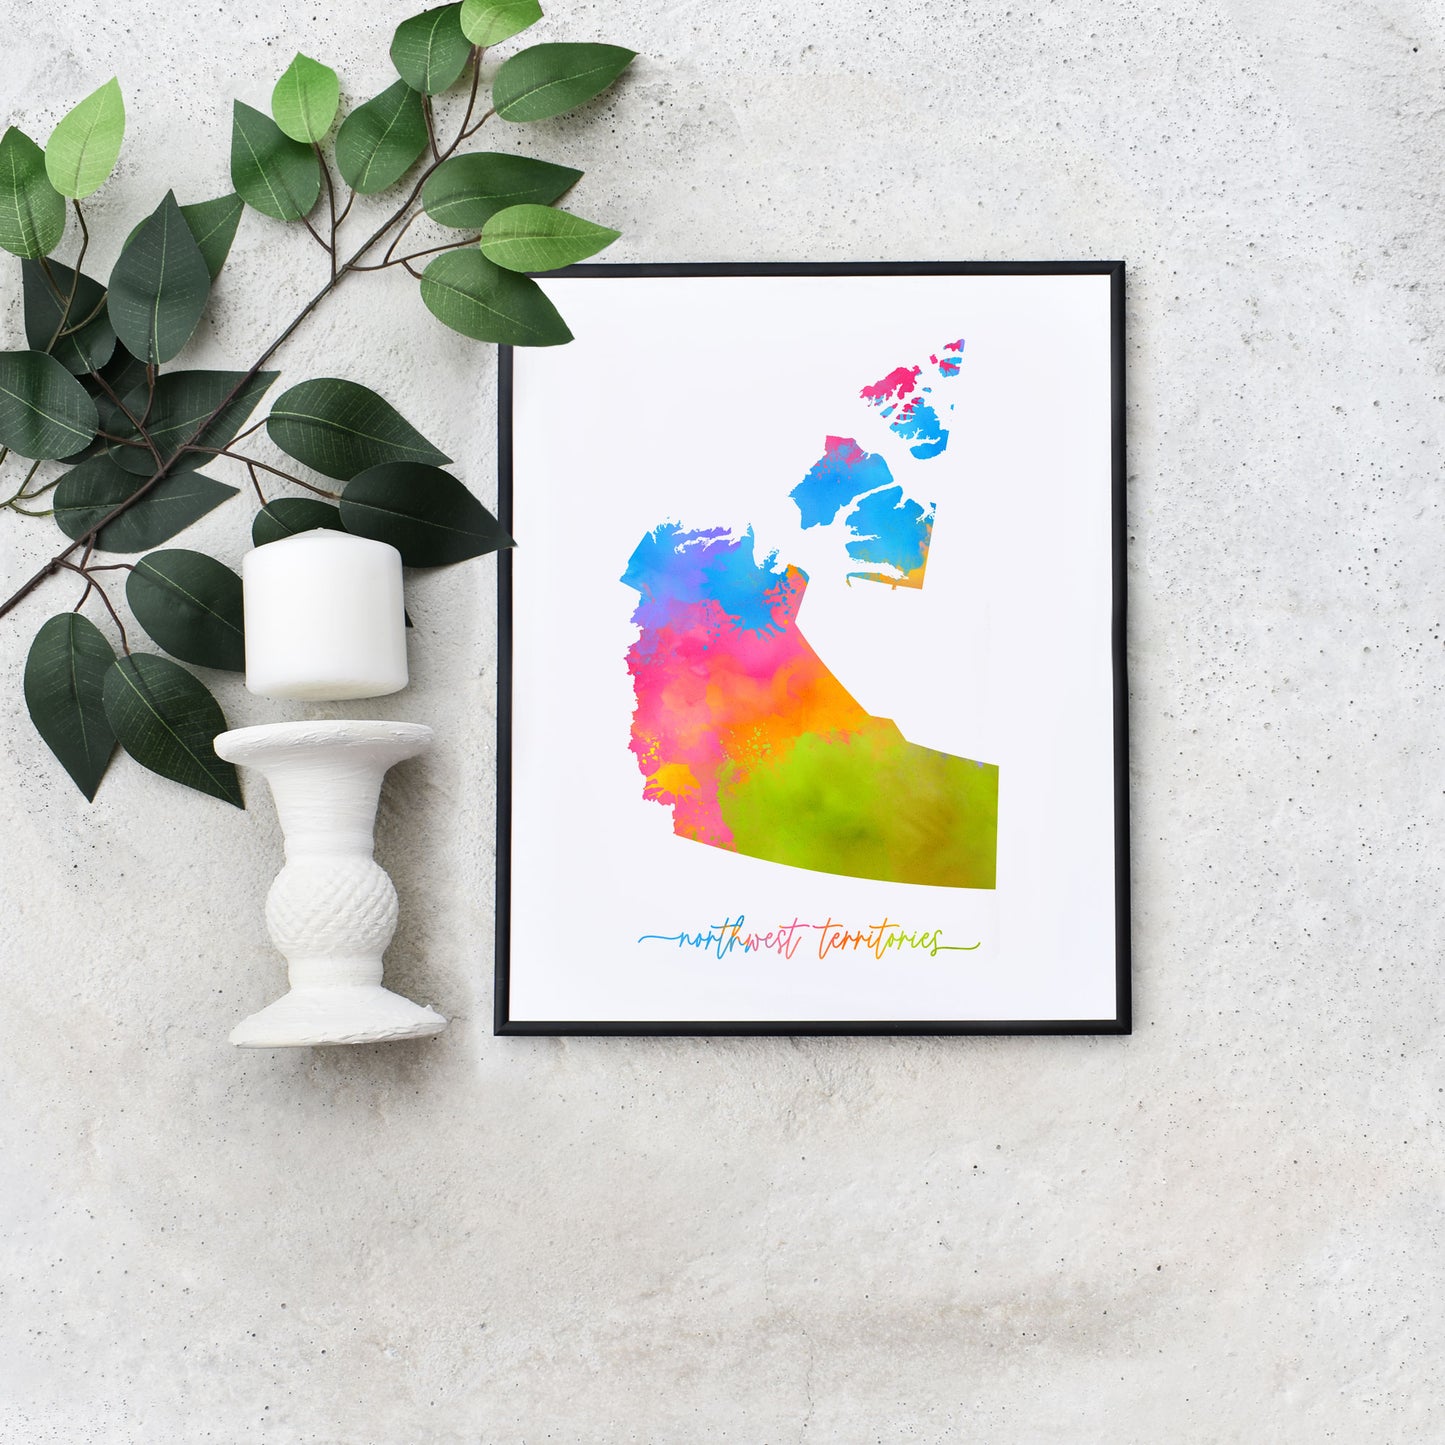 Easy Printable Rainbow Northwest Territories Map Home Wall Art on a Budget